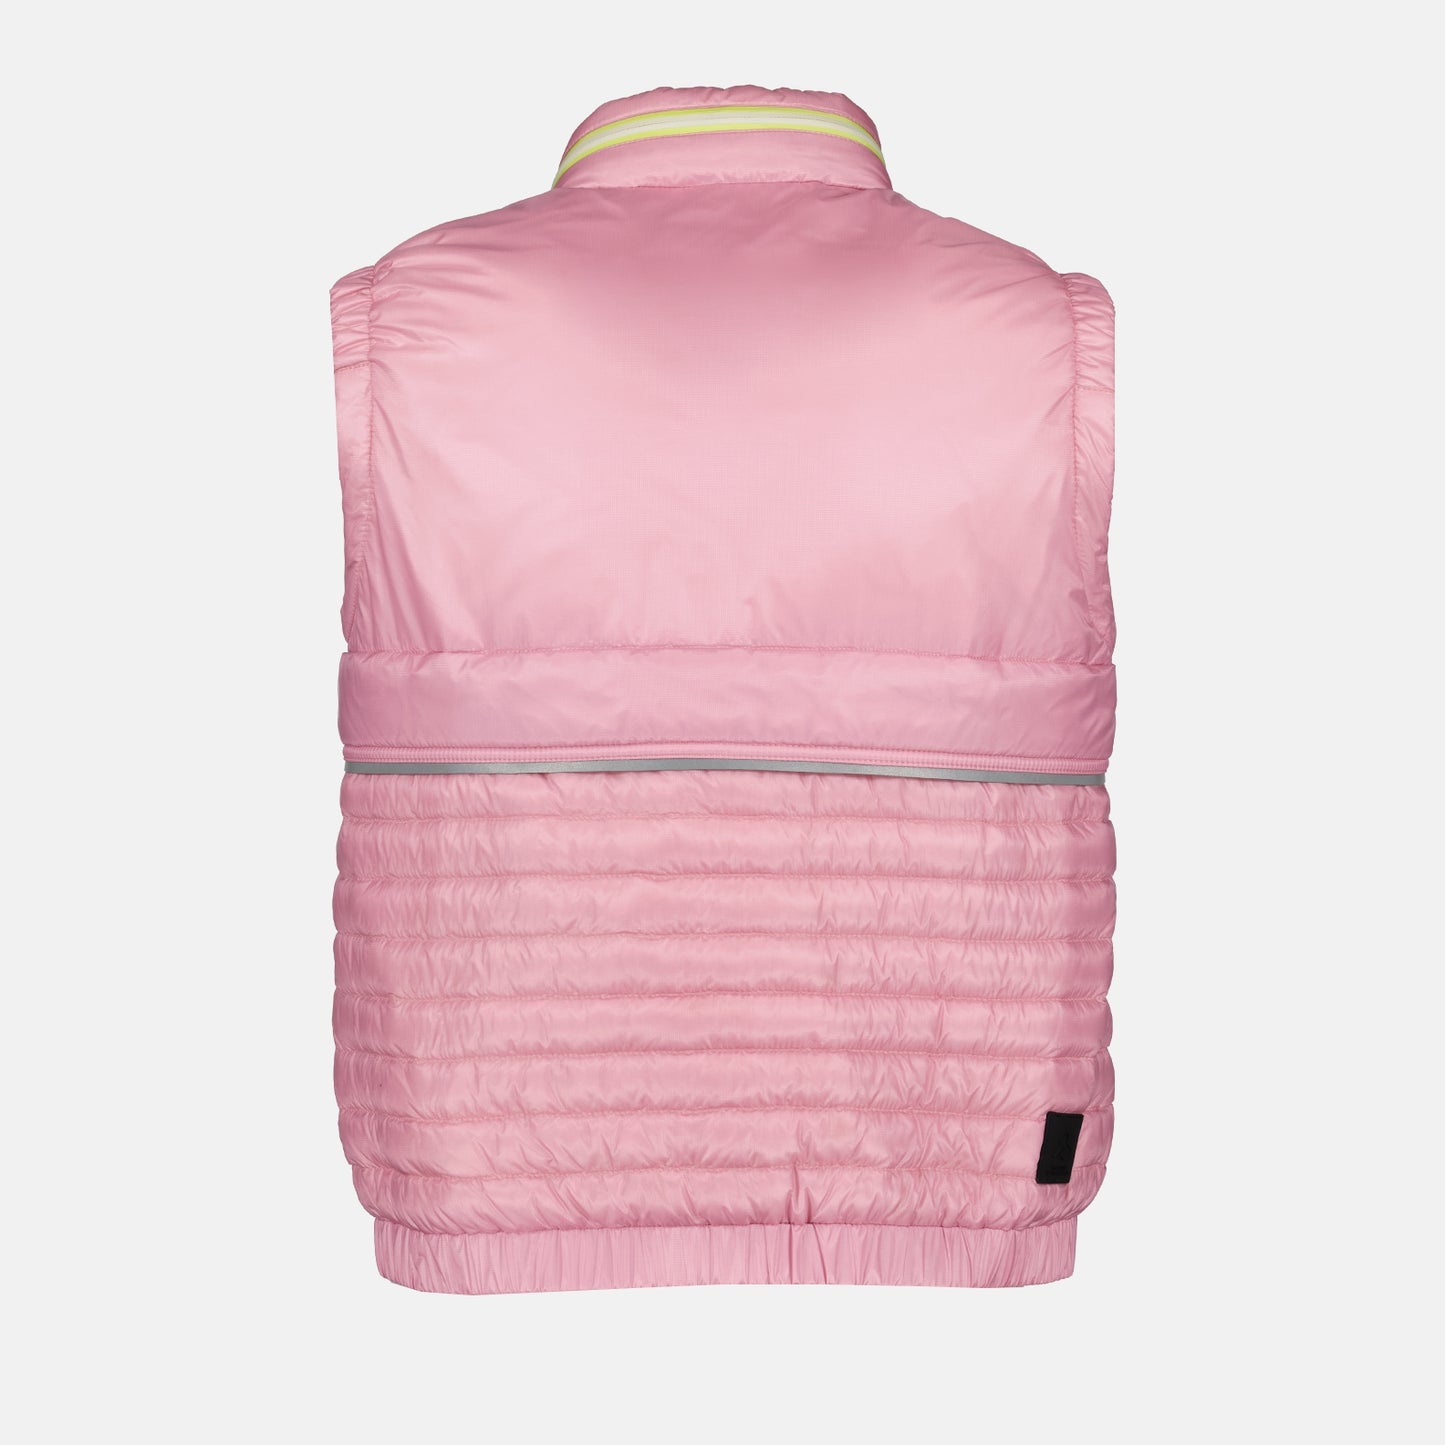 Gumiane quilted jacket